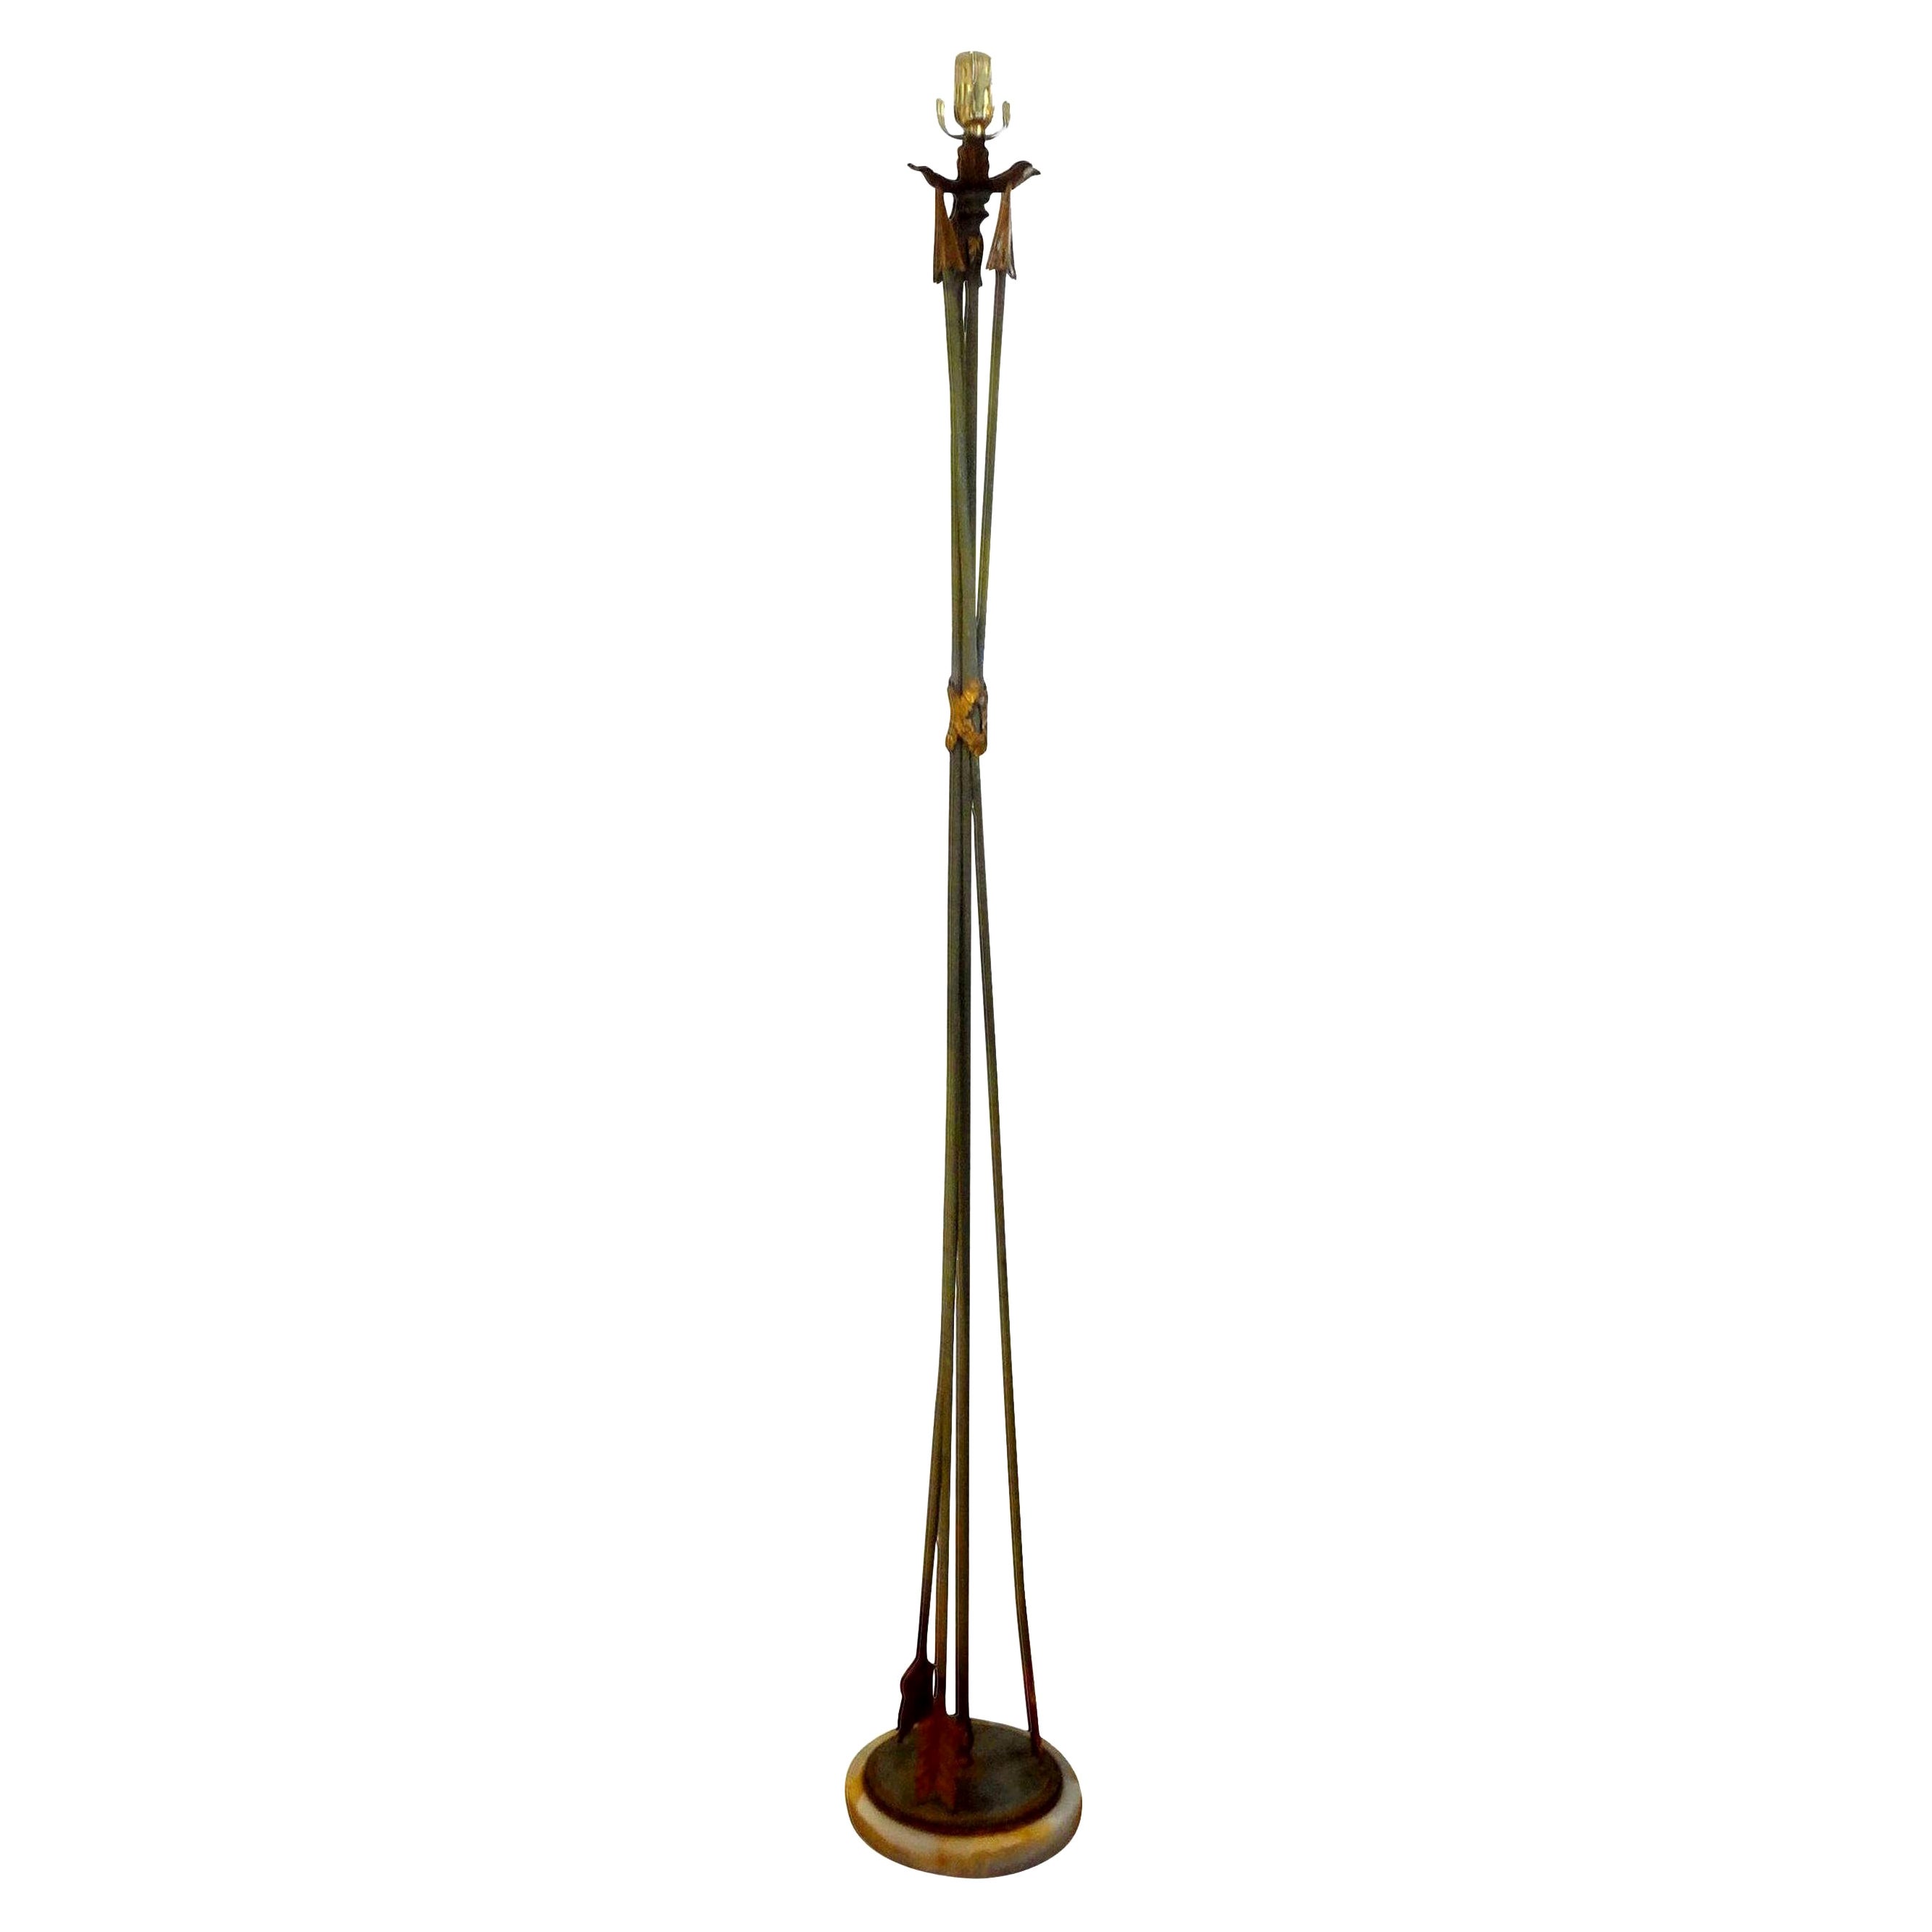 French Neoclassical Style Floor Lamp with Arrows